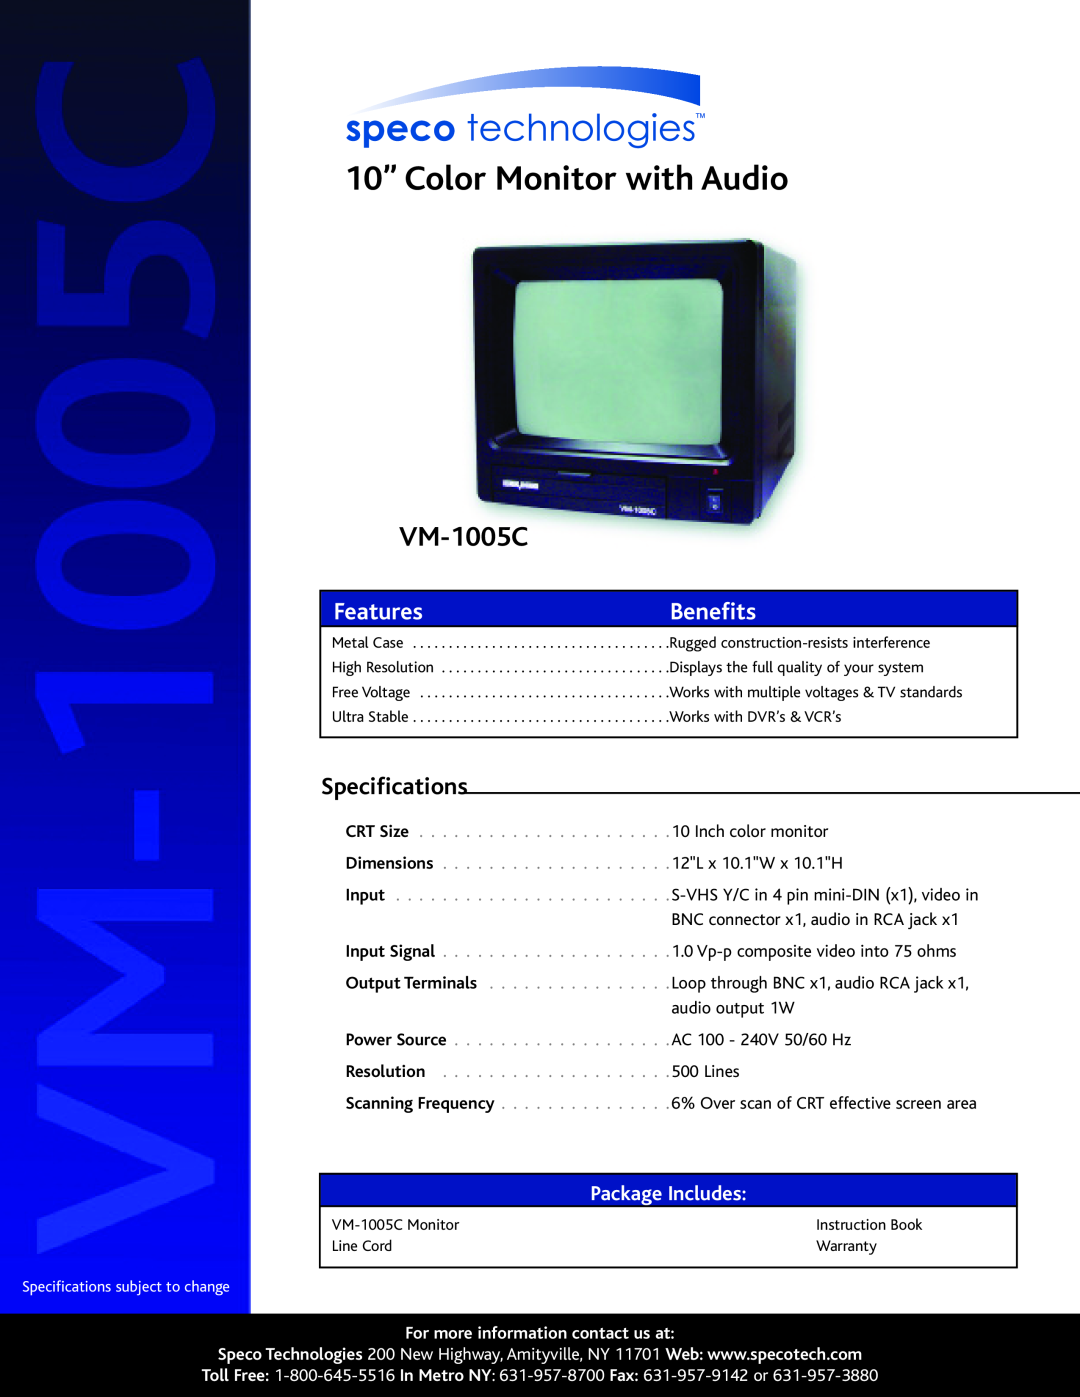 Speco Technologies VM-1005C specifications 10” Color Monitor with Audio, Features, Benefits, Package Includes, CRT Size 